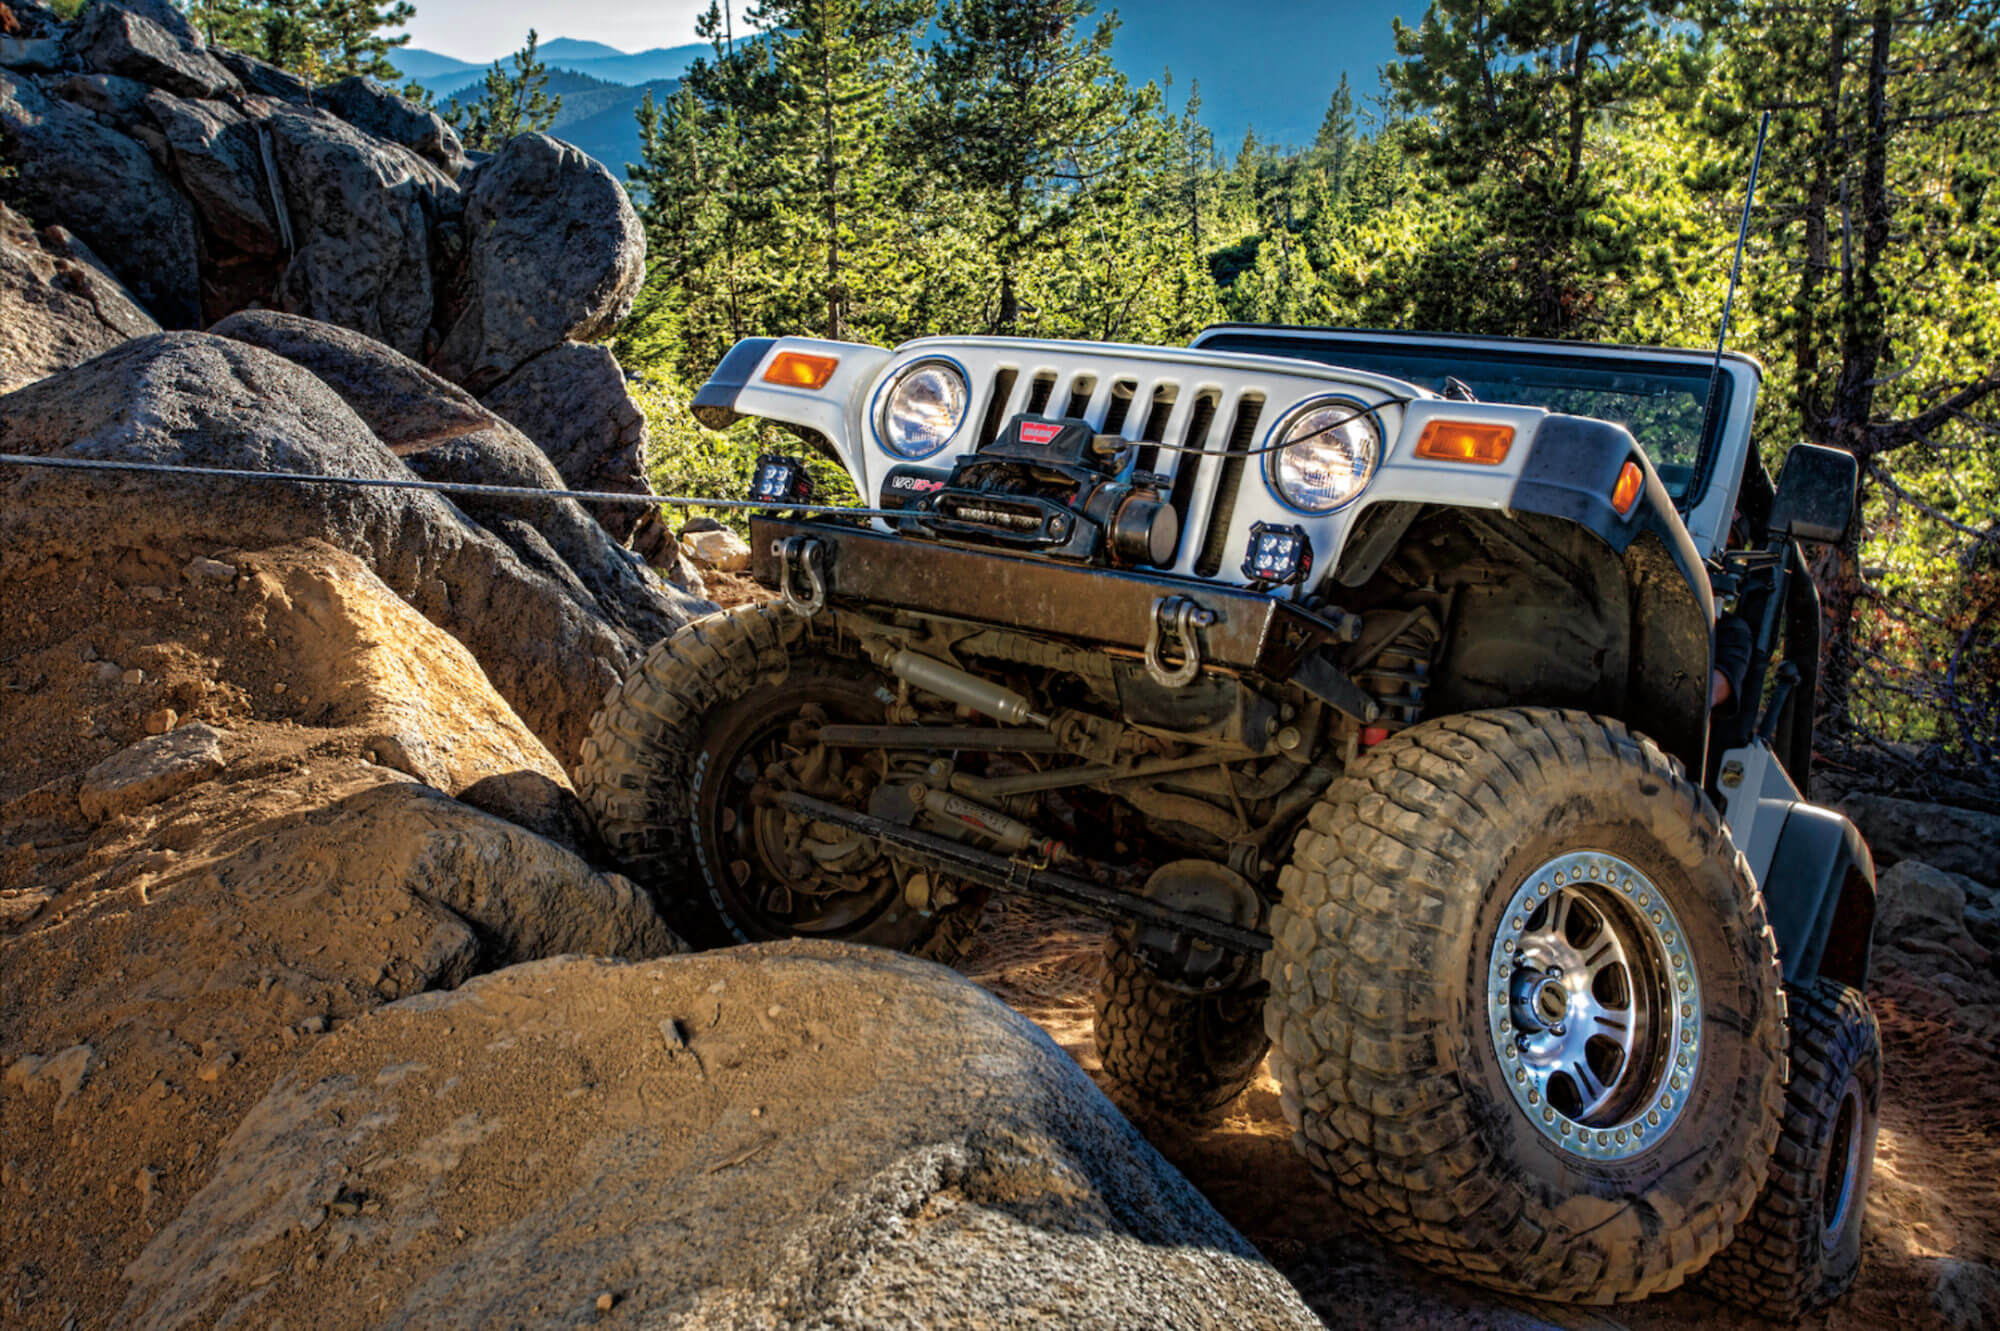 Must-Read Tips for Choosing Your Off-Road Replacement Winch